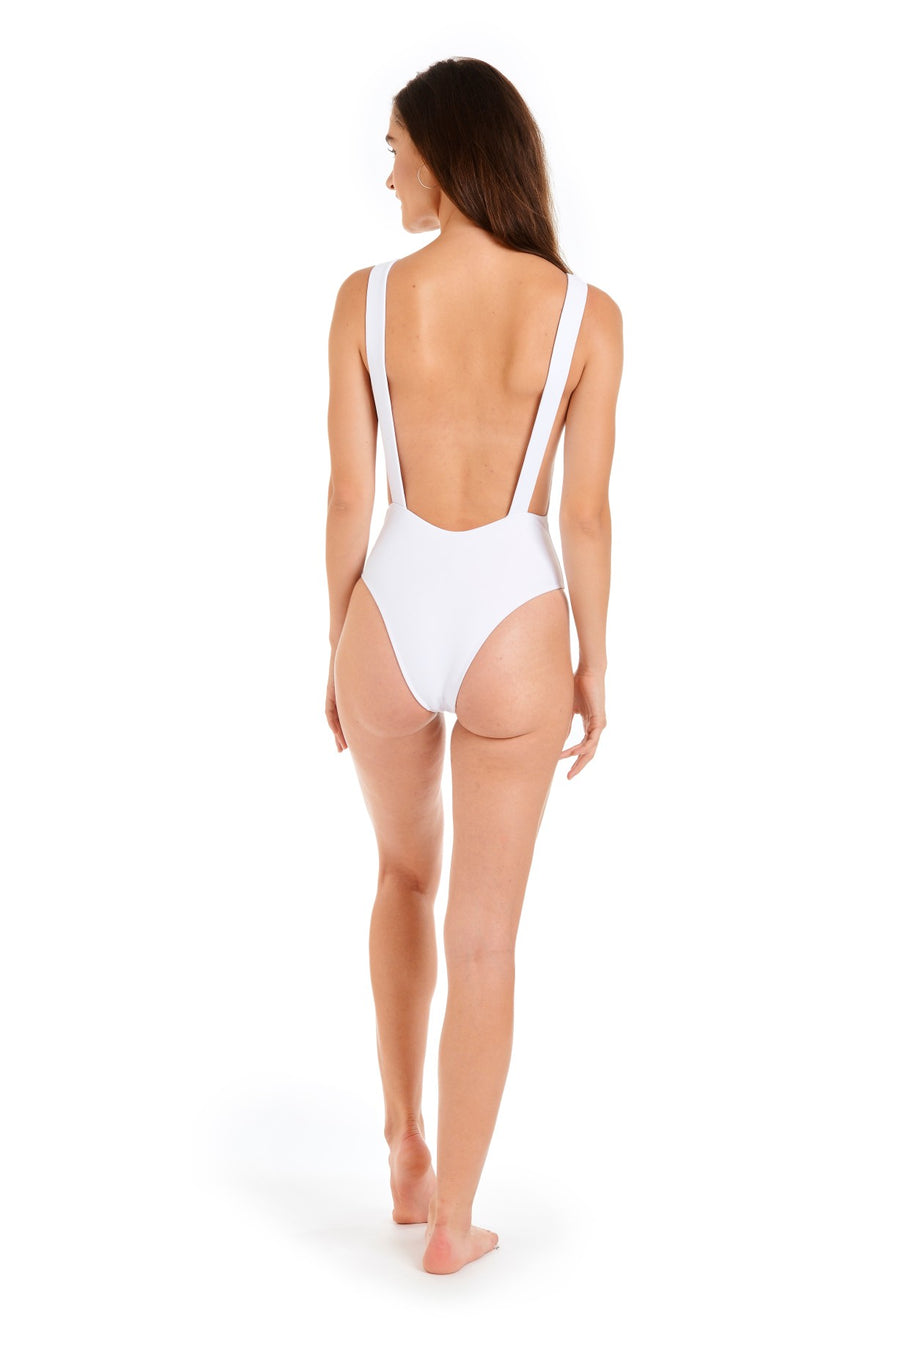 Back view of a woman wearing a white one piece swimsuit